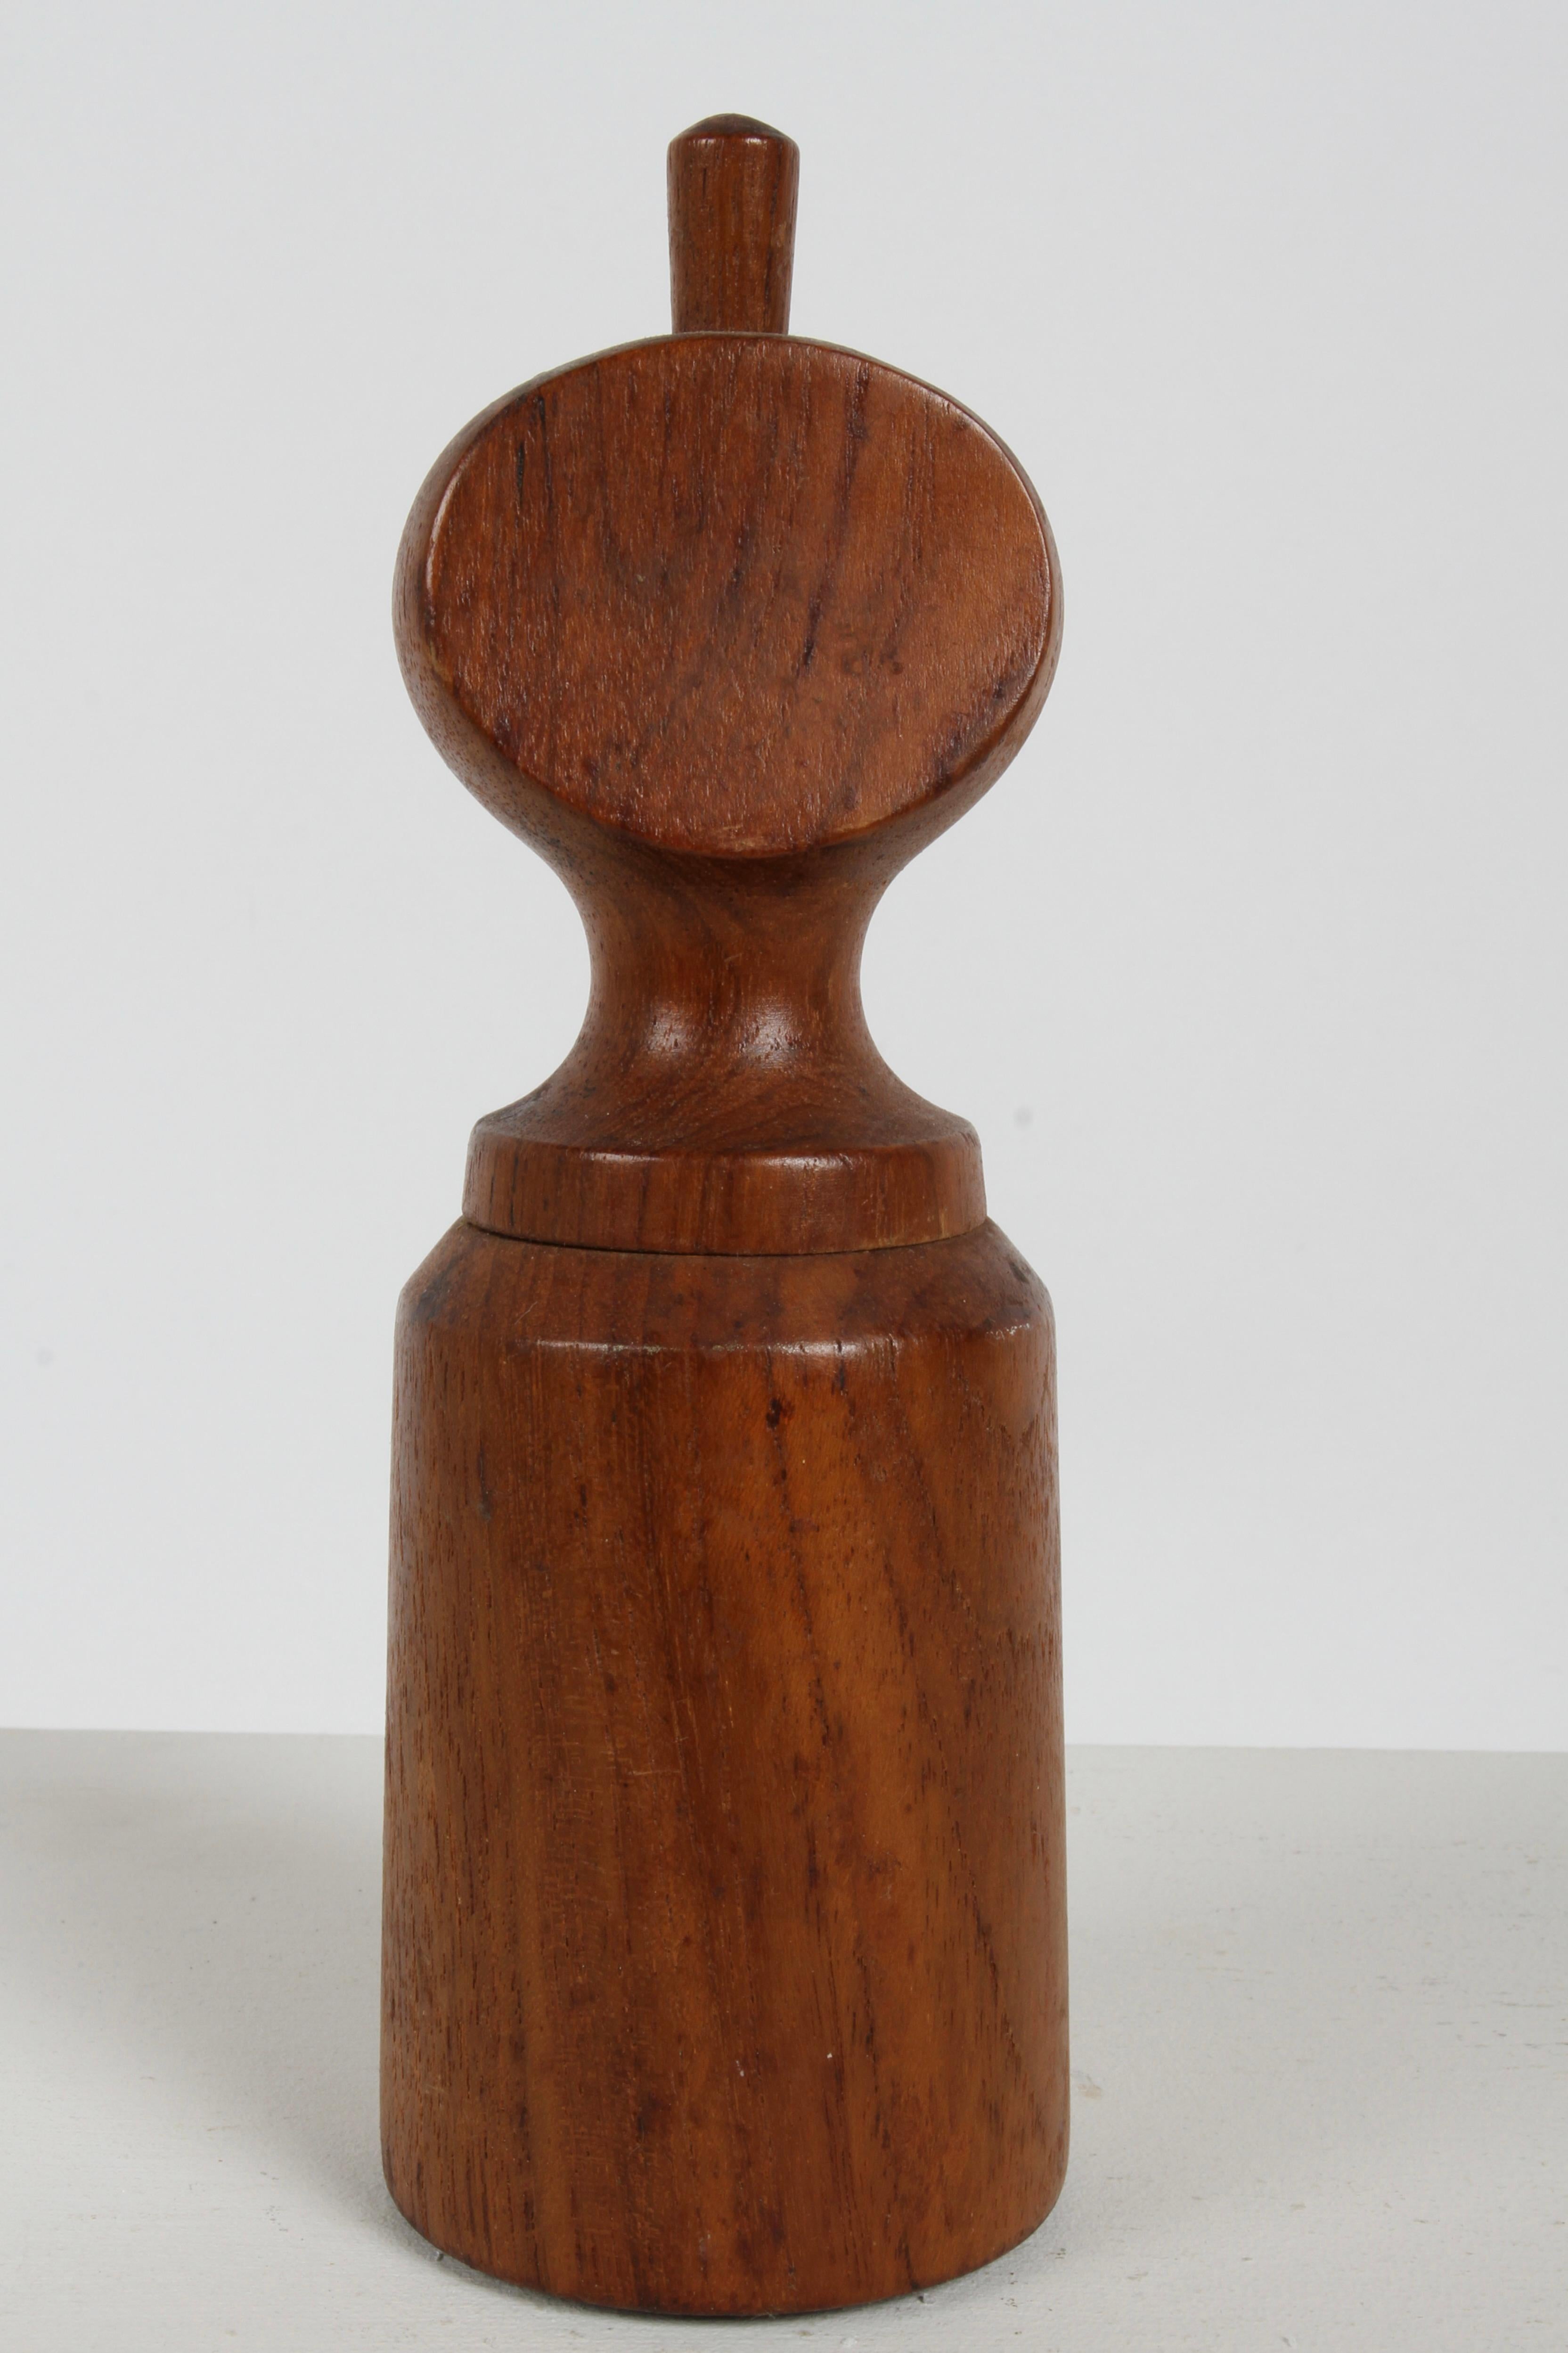 1960s Danish Modern Jens Quistgaard Teak Peppermill with Salt by Dansk In Good Condition For Sale In St. Louis, MO